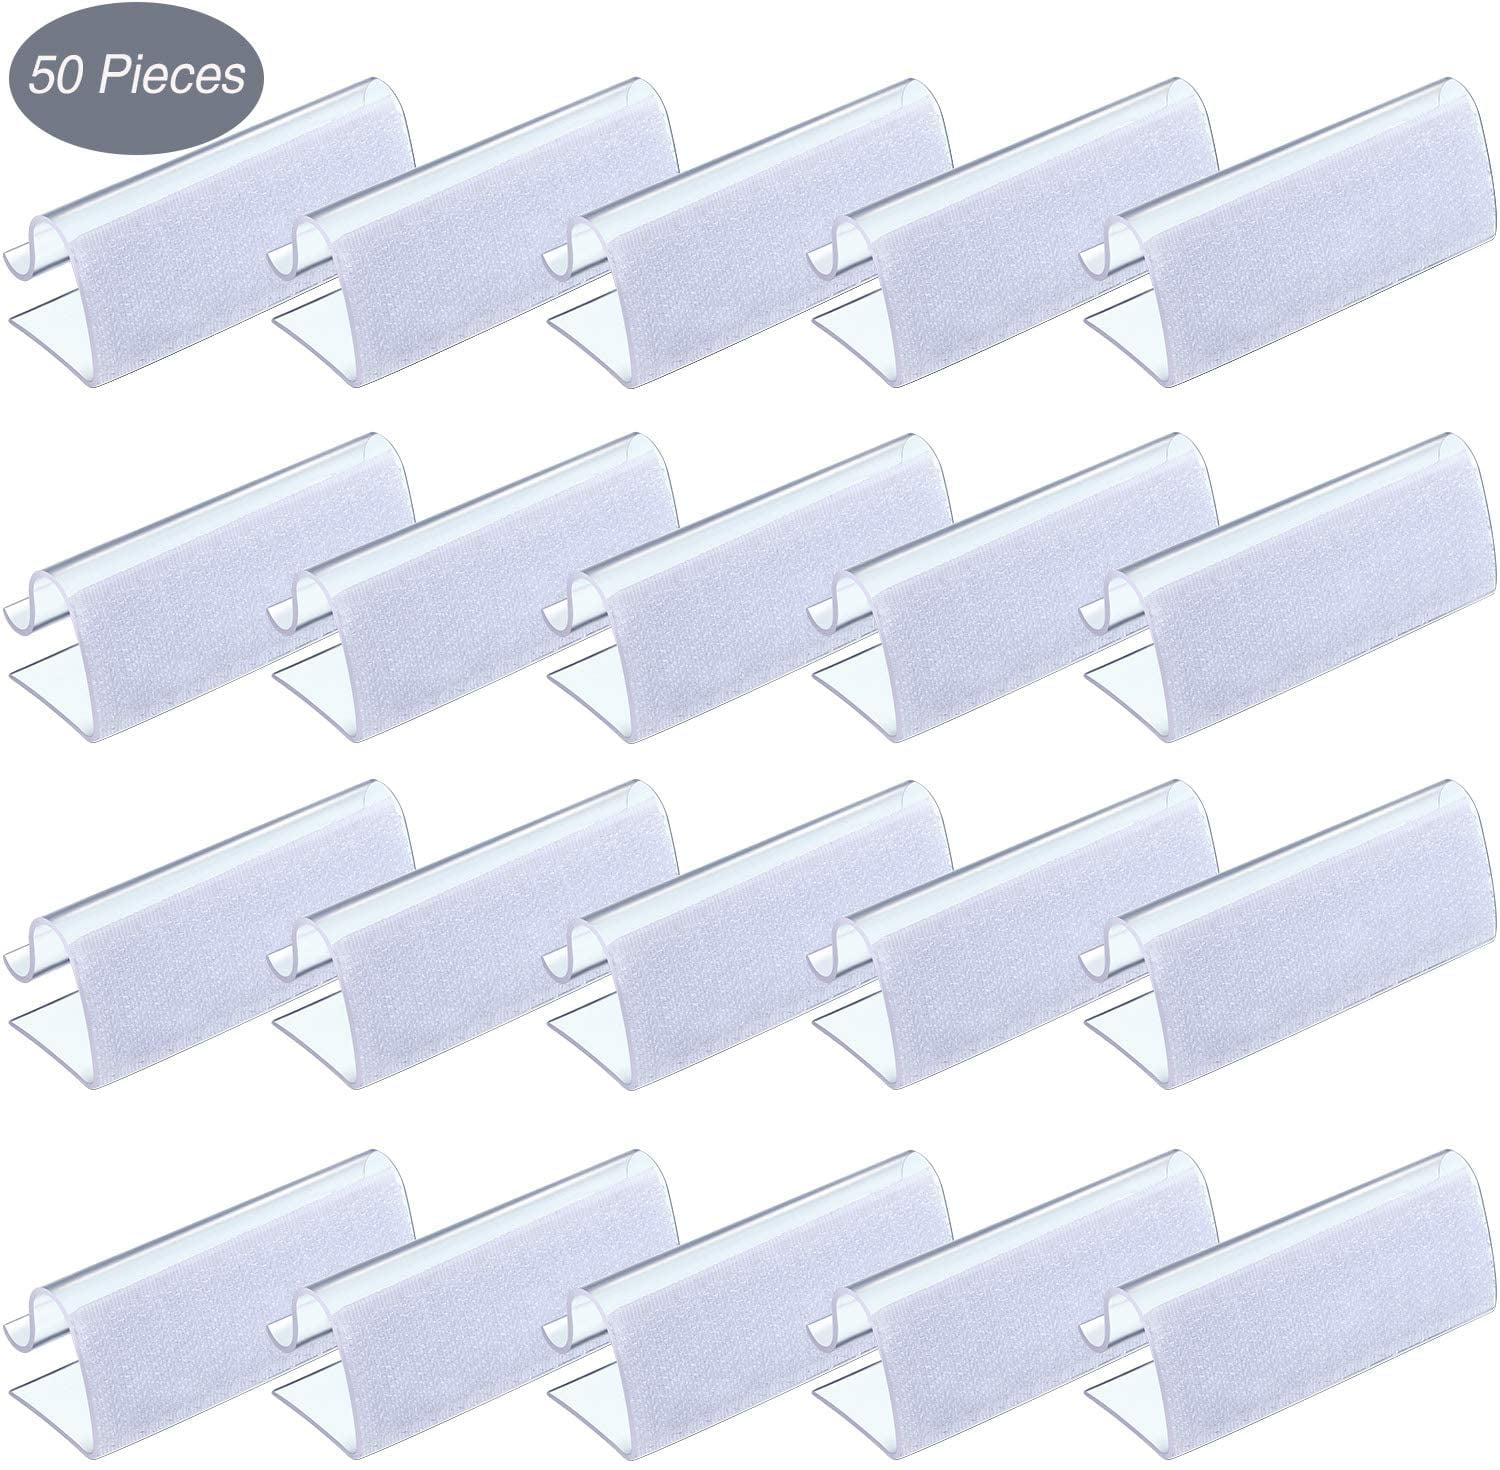 12pcs Outdoor Catering Dining Table Clamps for Tablecloth Plastic Tablecloth Clips With Hook & Loop Strips Table Skirt Clips For Weddings